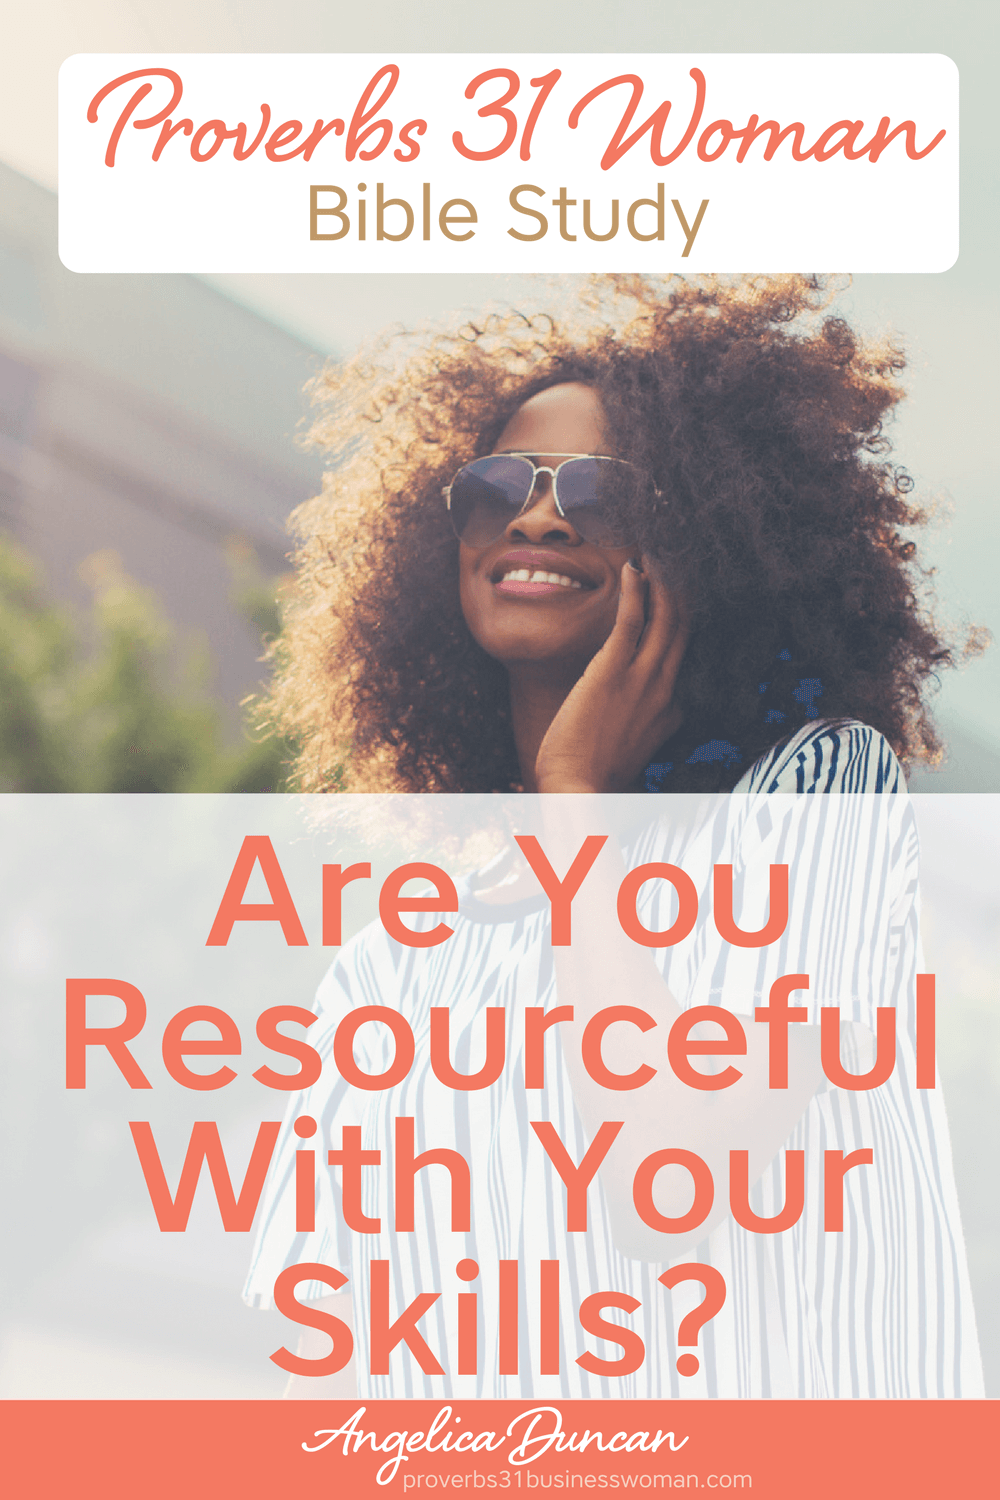 They say it takes skills to pay the bills, right? Let's find out how to use your skills to bless your family BIG in our Proverbs 31 Woman Bible Study! #p31 #proverbs31woman #proverbs31businesswoman #biblestudy #christianblogger #jesusgirl